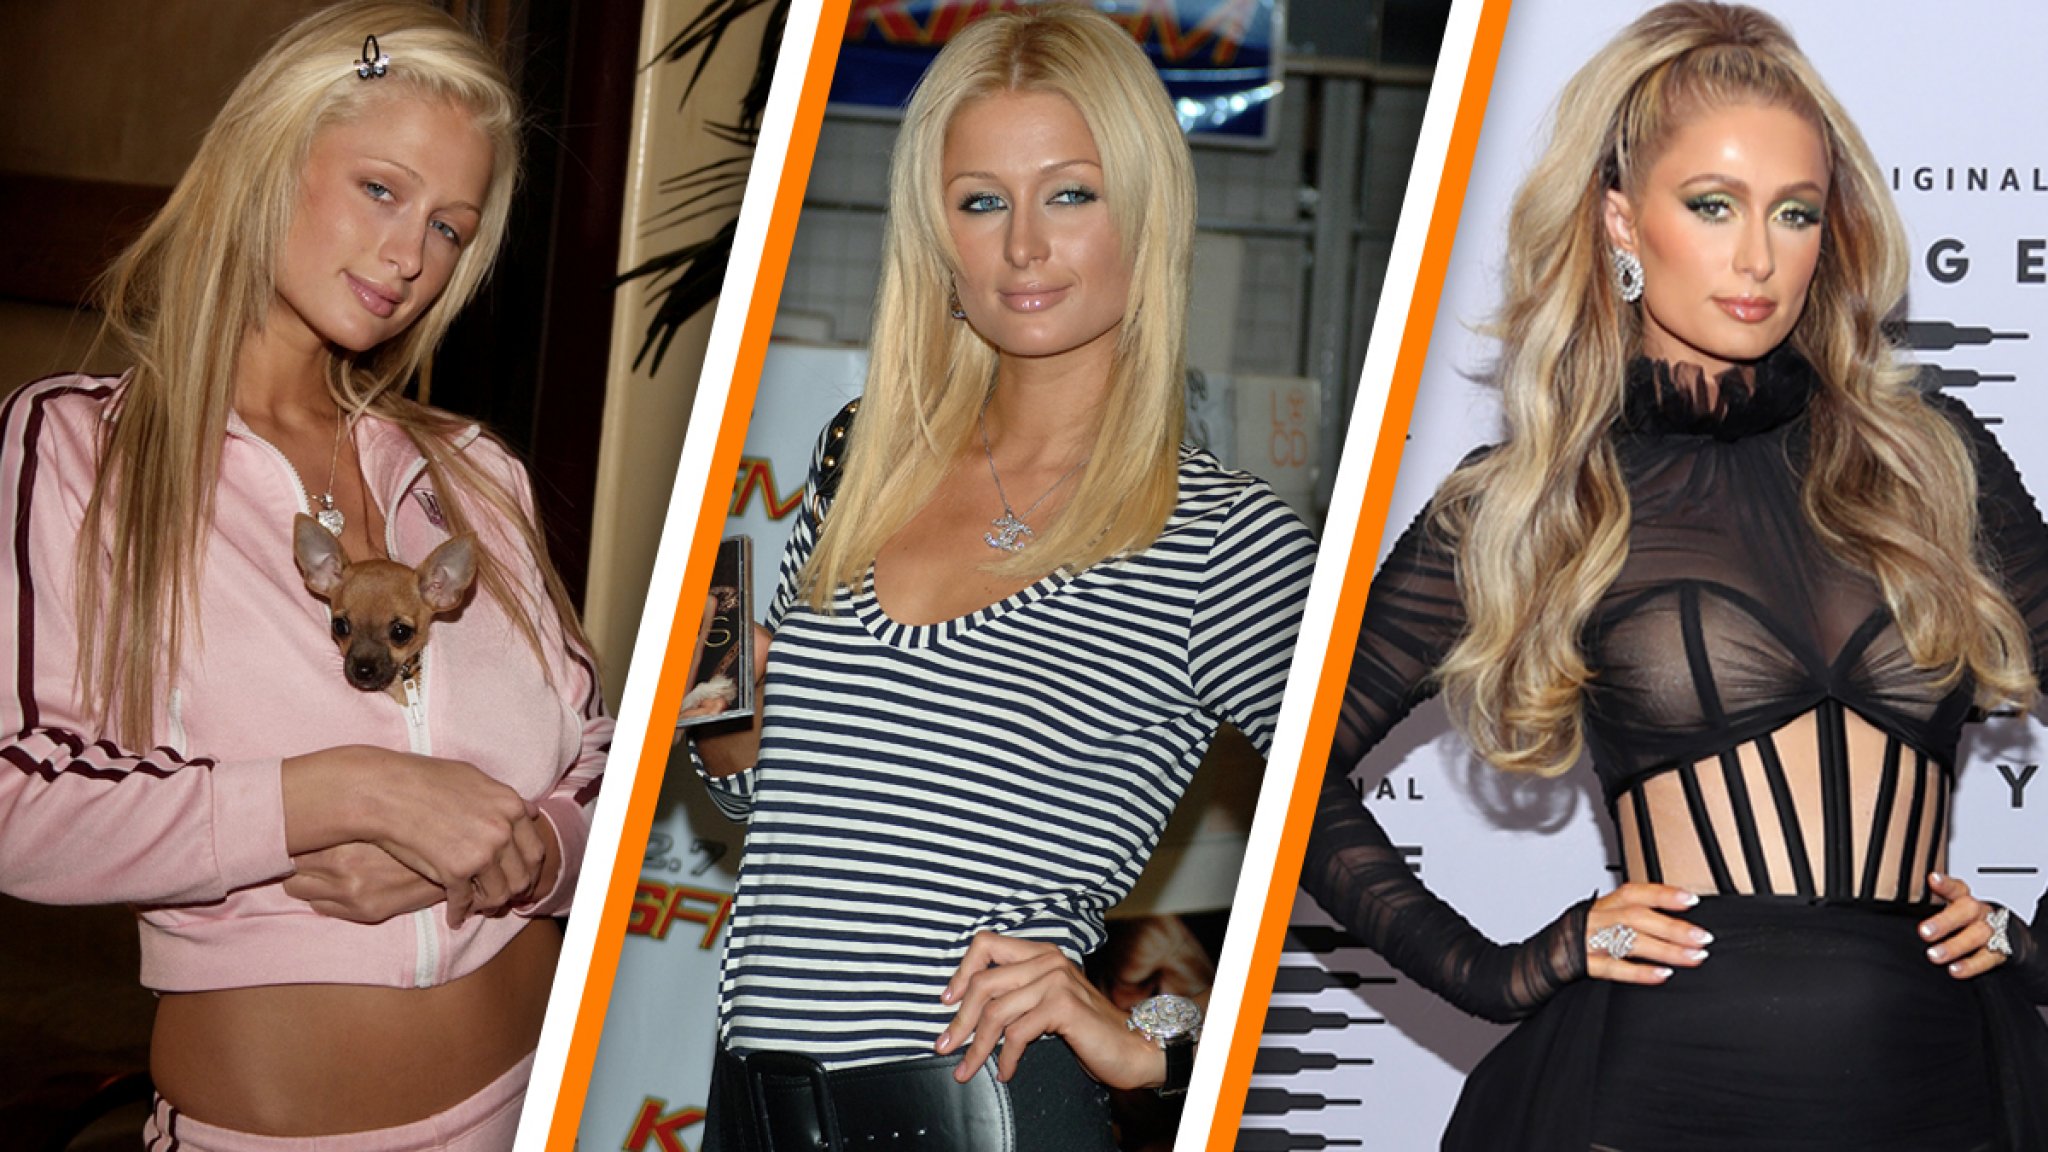 This one's hot: Paris Hilton turns 40 and we're looking back